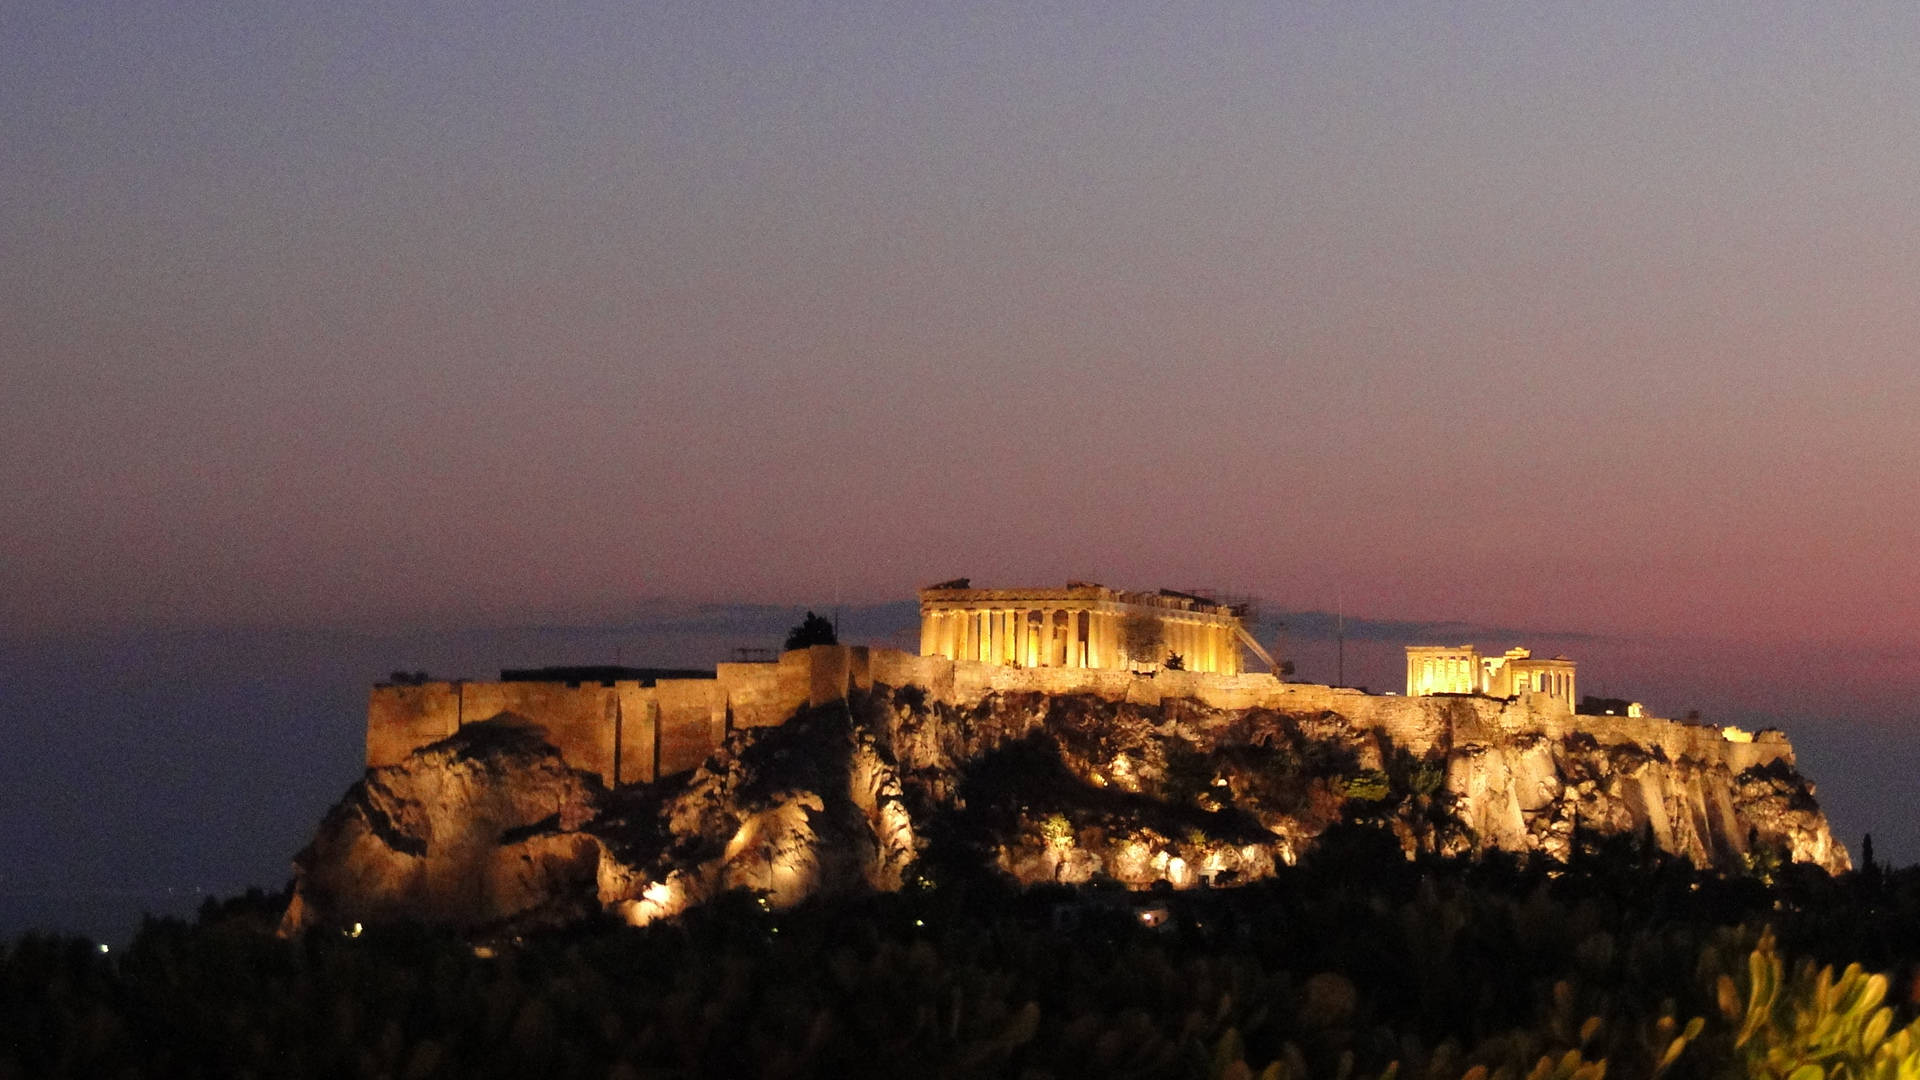 Majestic View Of Ancient Parthenon On Acropolis Hill|